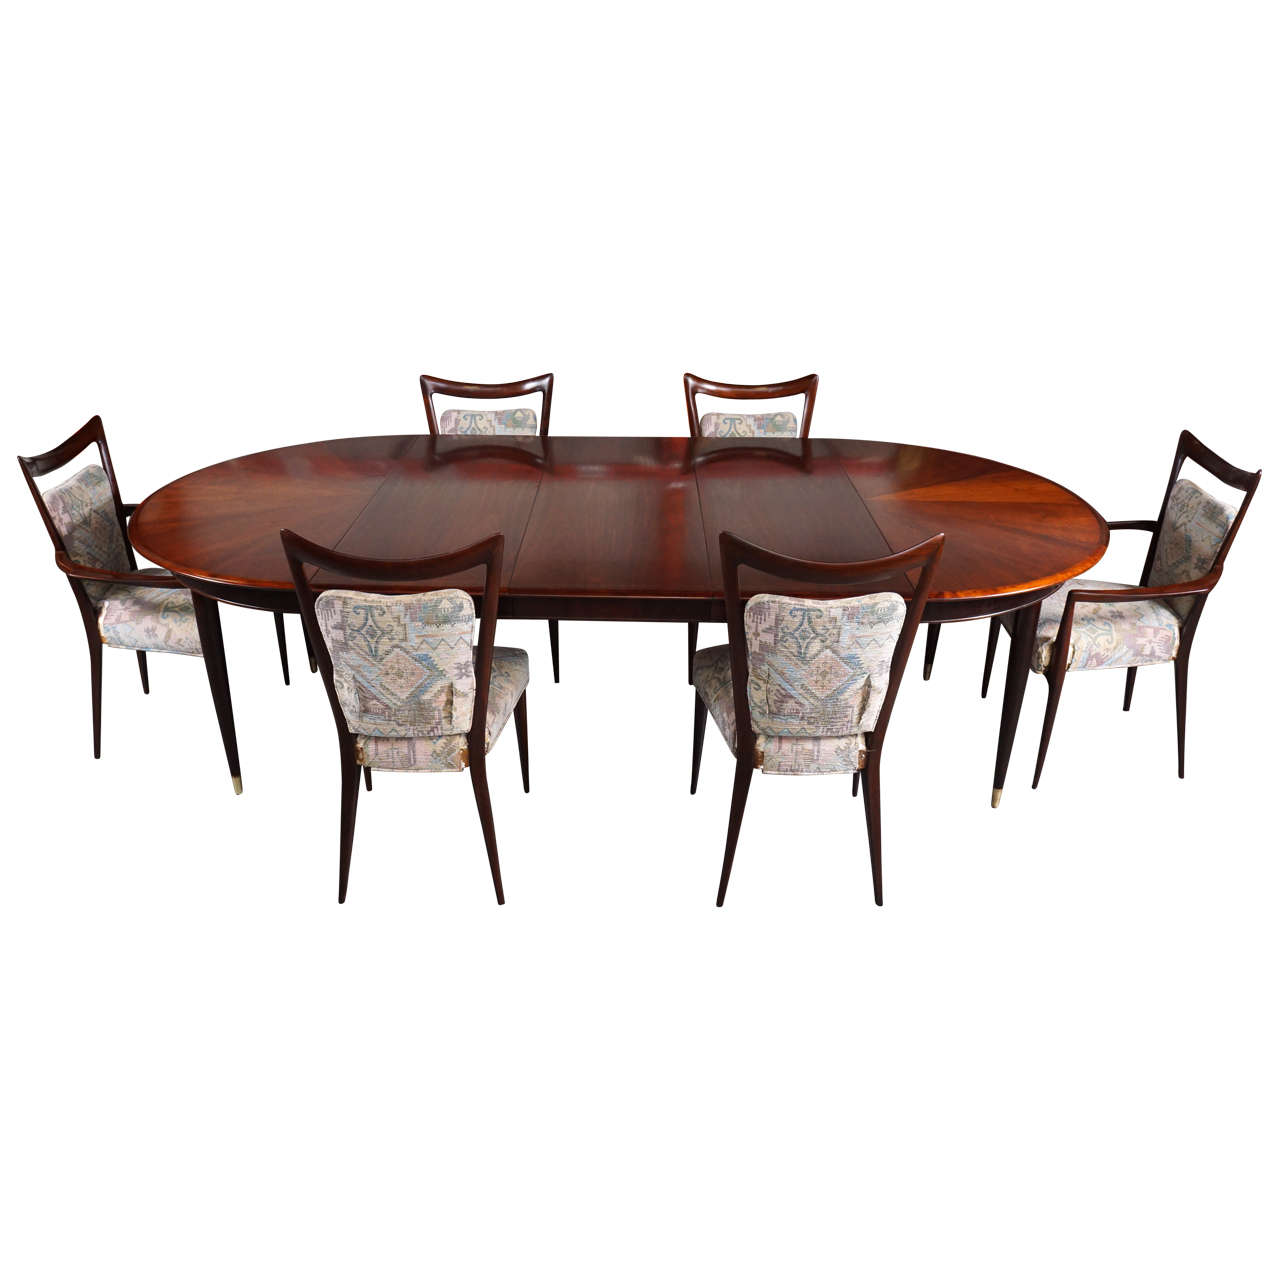 Melchiorre Bega Mahogany Dining Set, 10 Chairs, Table with Three Leaves, Italy For Sale